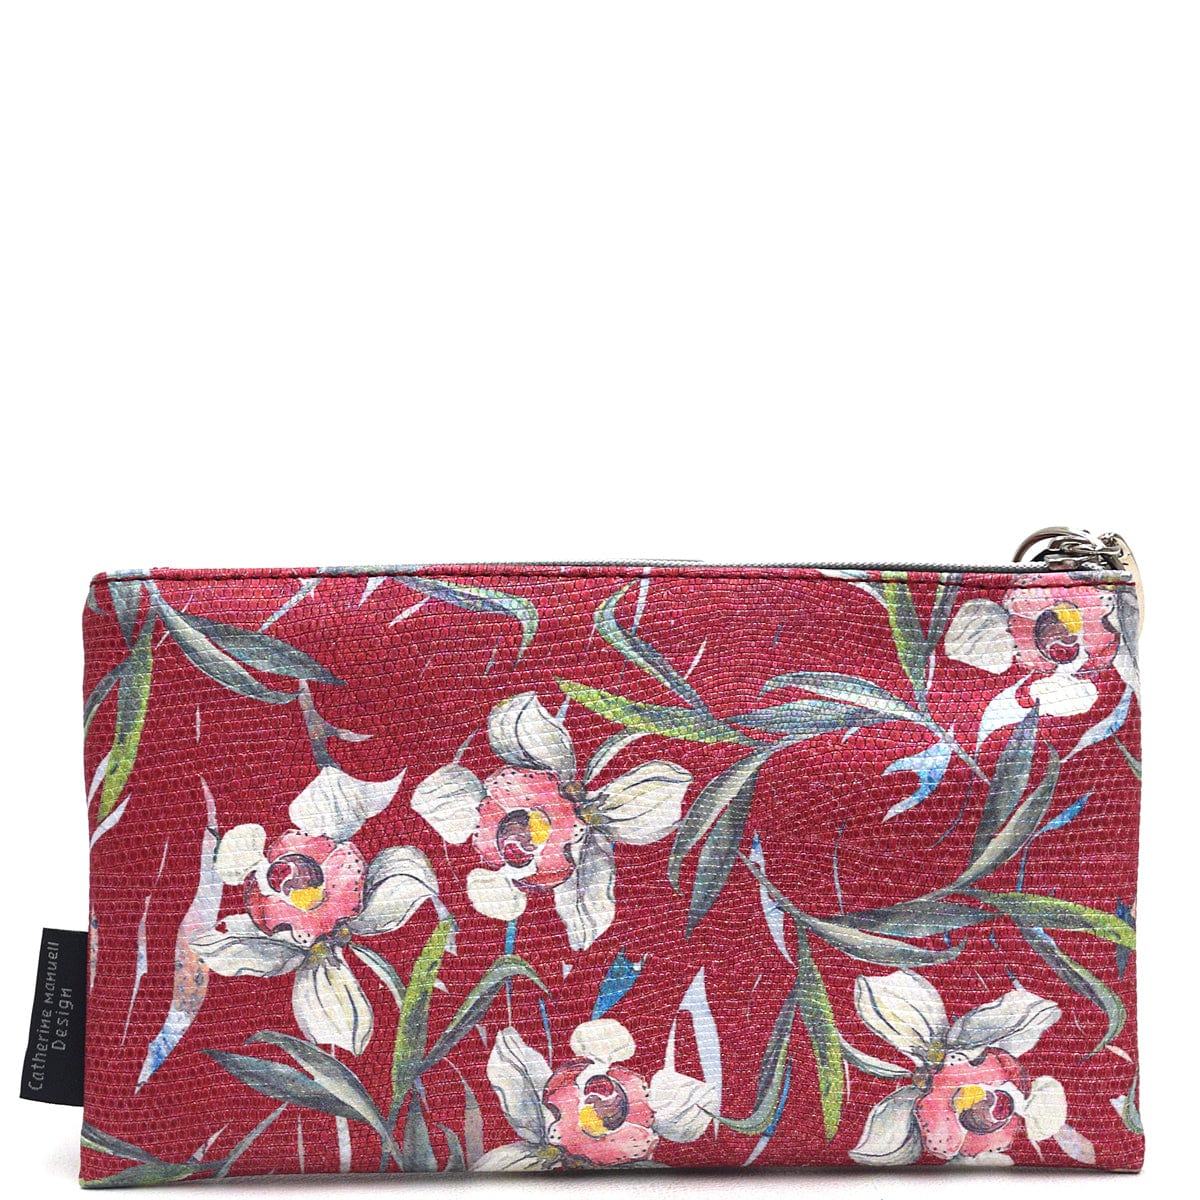 Linen Purse with Hand-sewn Rose Myrtle Pattern – TrucLam